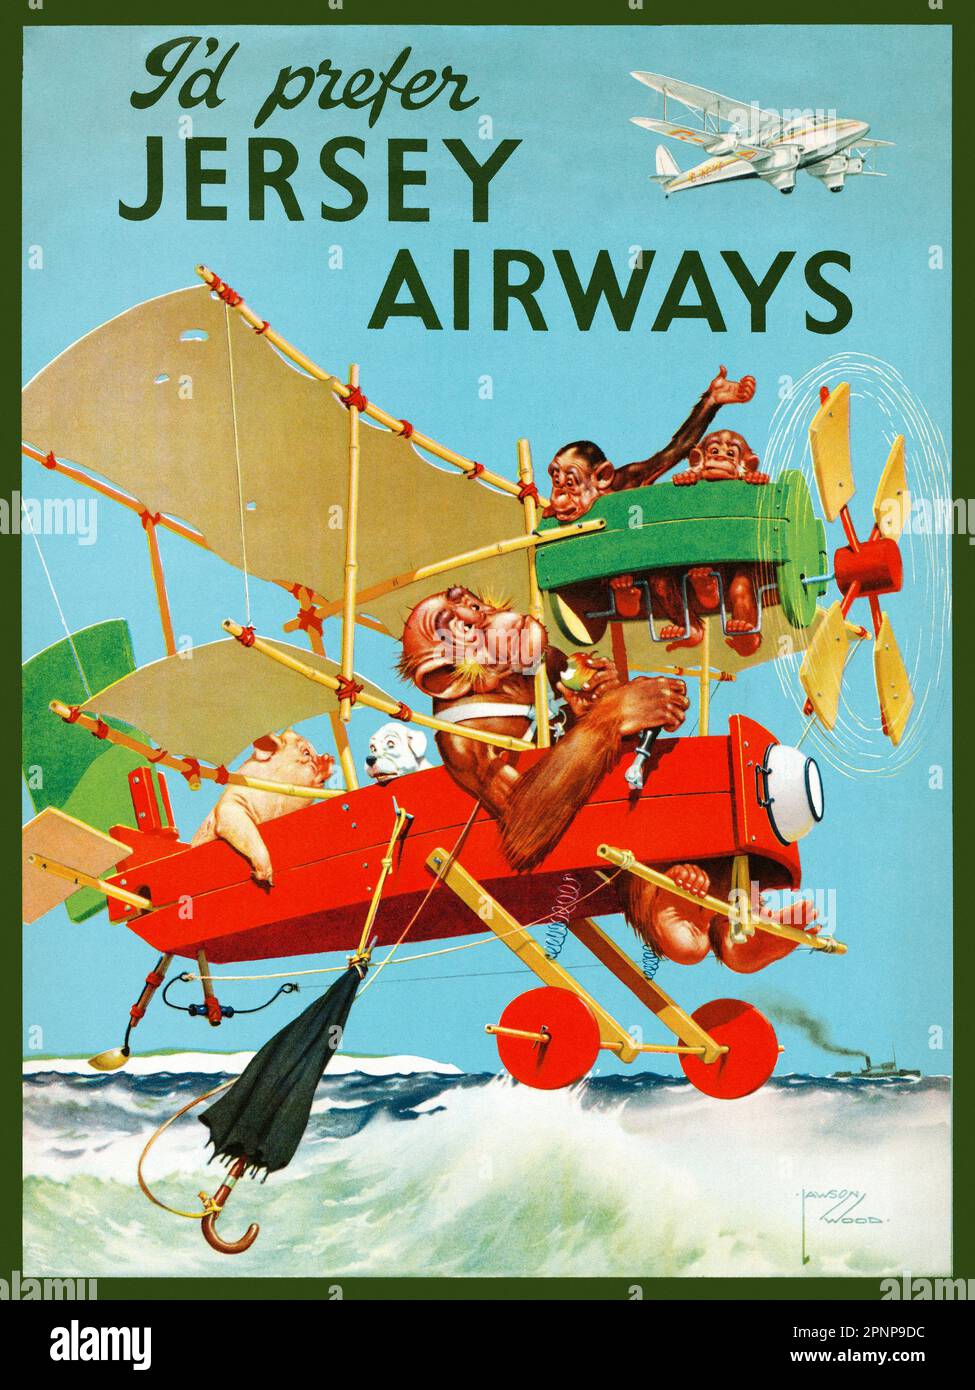 I'd prefer Jersey Airways by Lawson Wood (1878-1957). Poster published in 1937 in the UK. Stock Photo